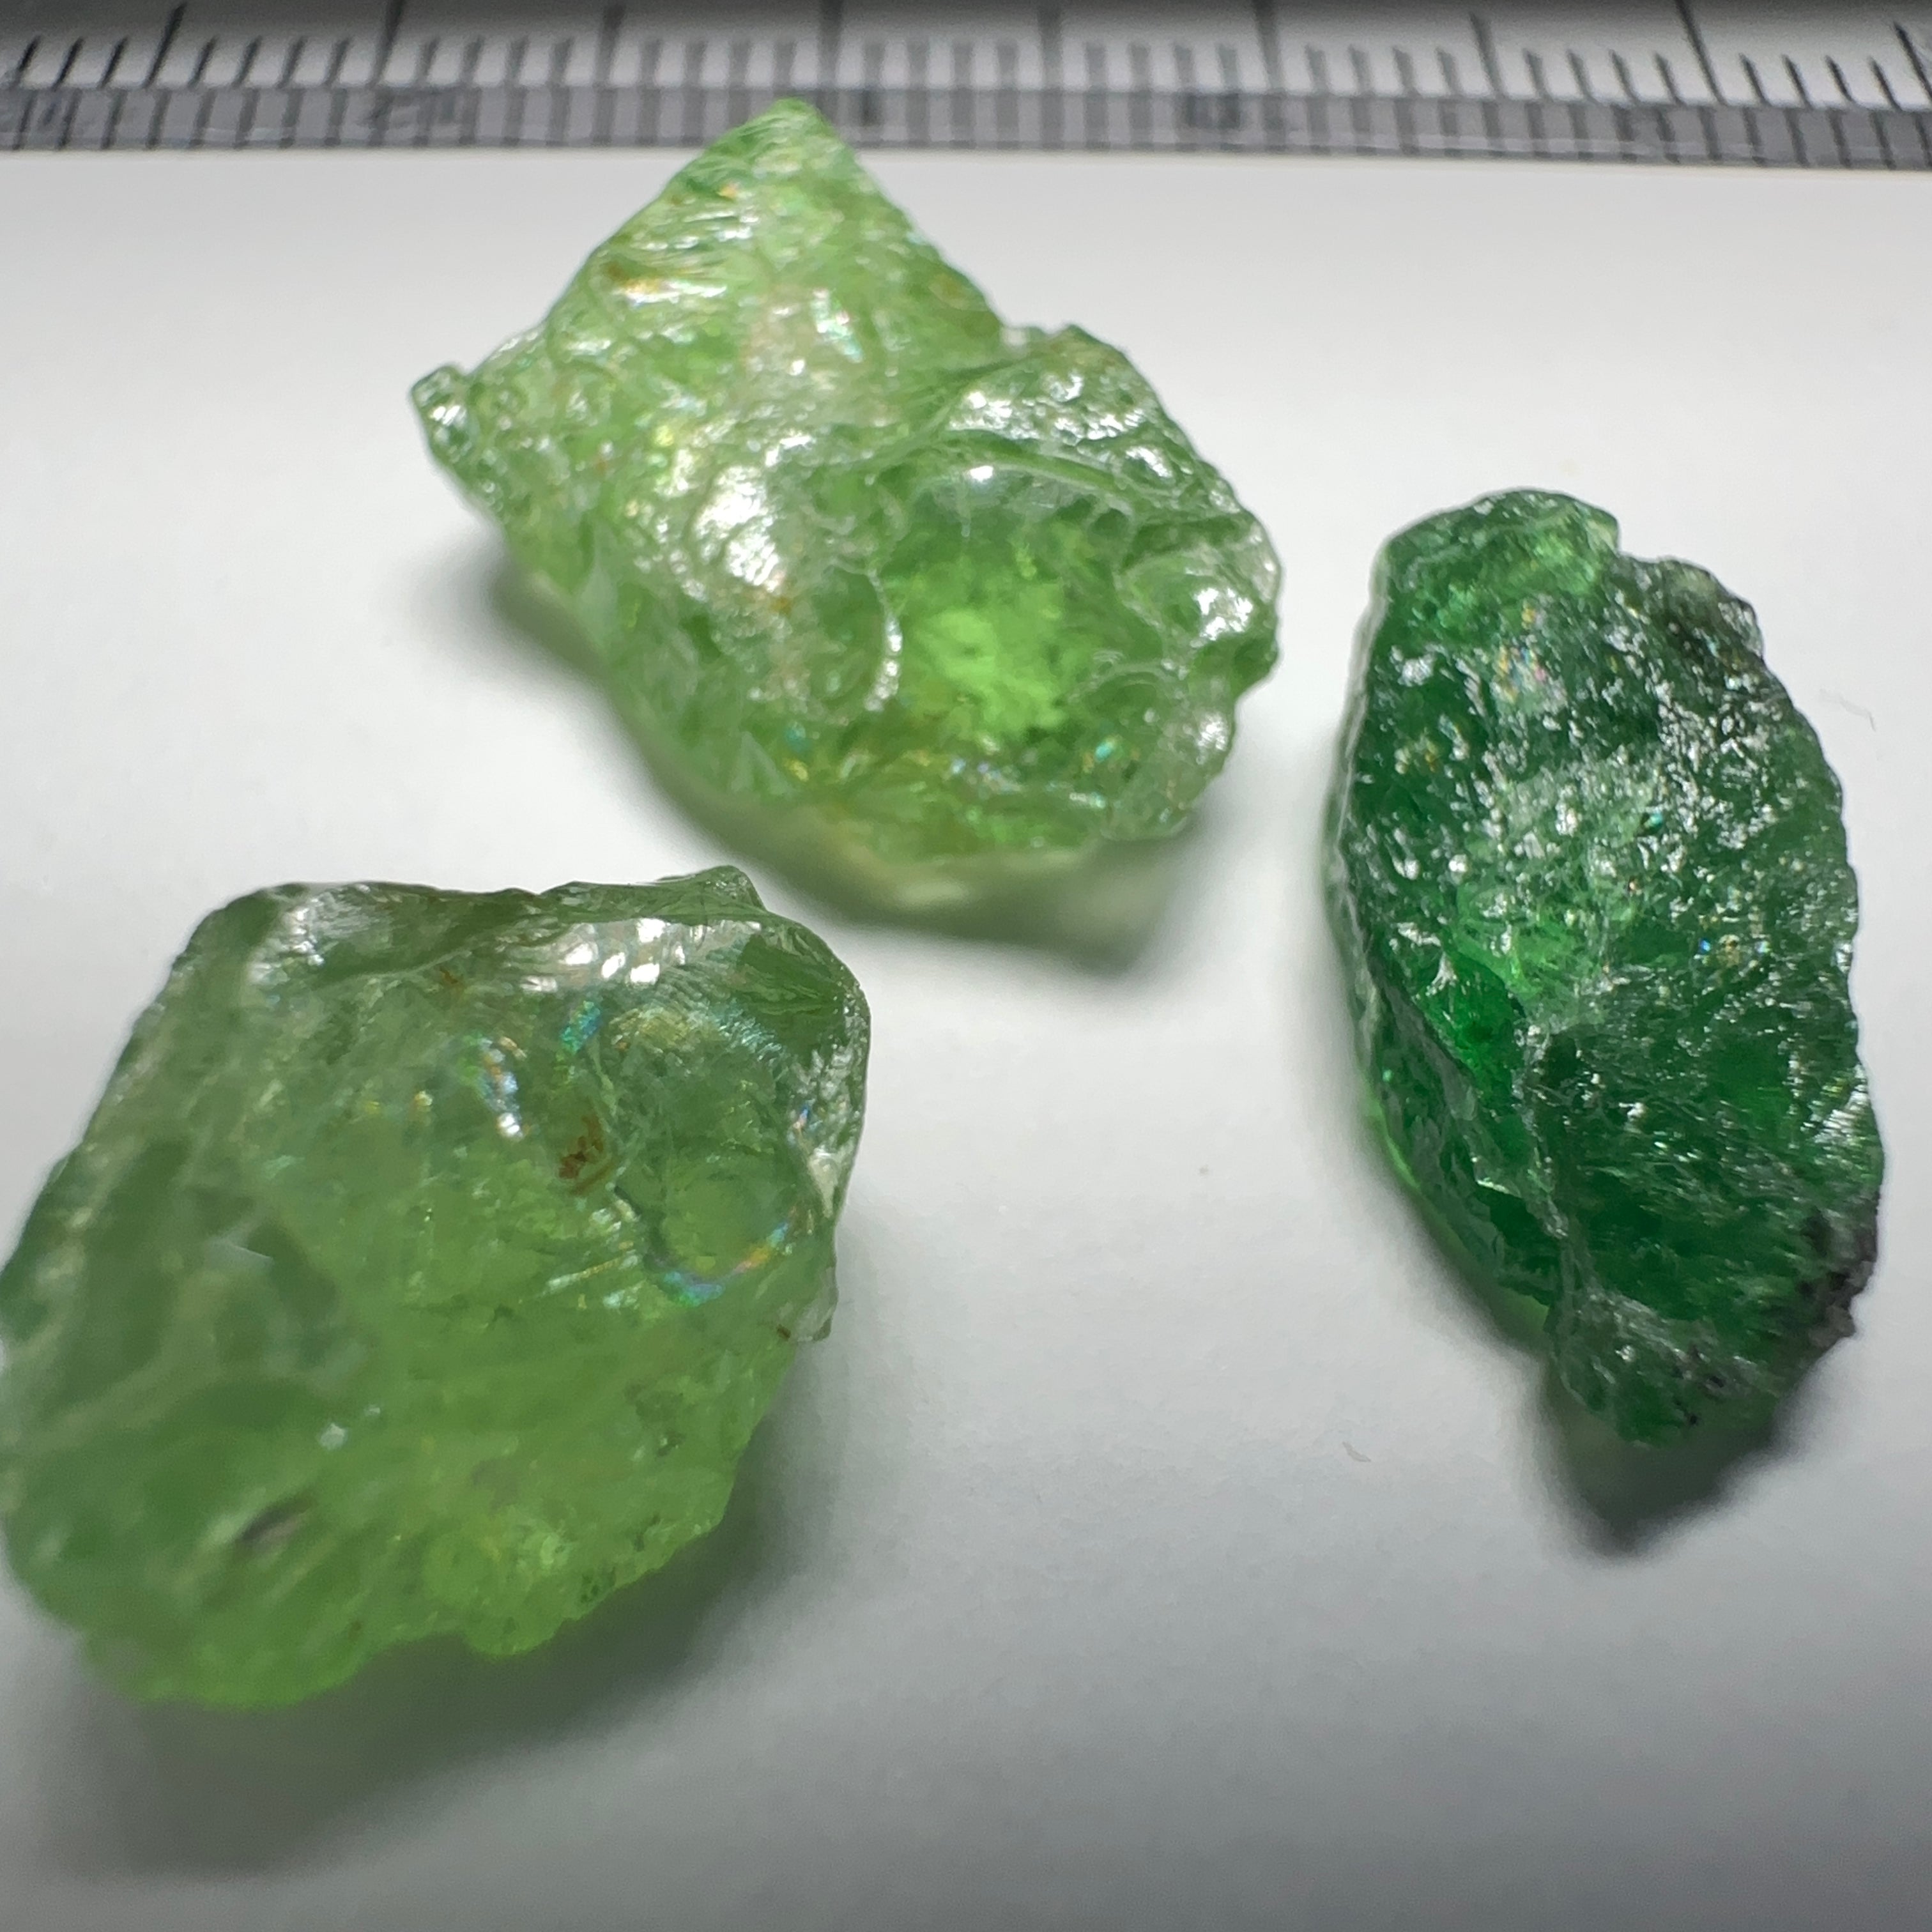 16.91ct Tsavorite Garnet Lot, Tanzania. Untreated Unheated. 4.20ct - 7.03ct. All included but transparent, good for setting in jewellery as is